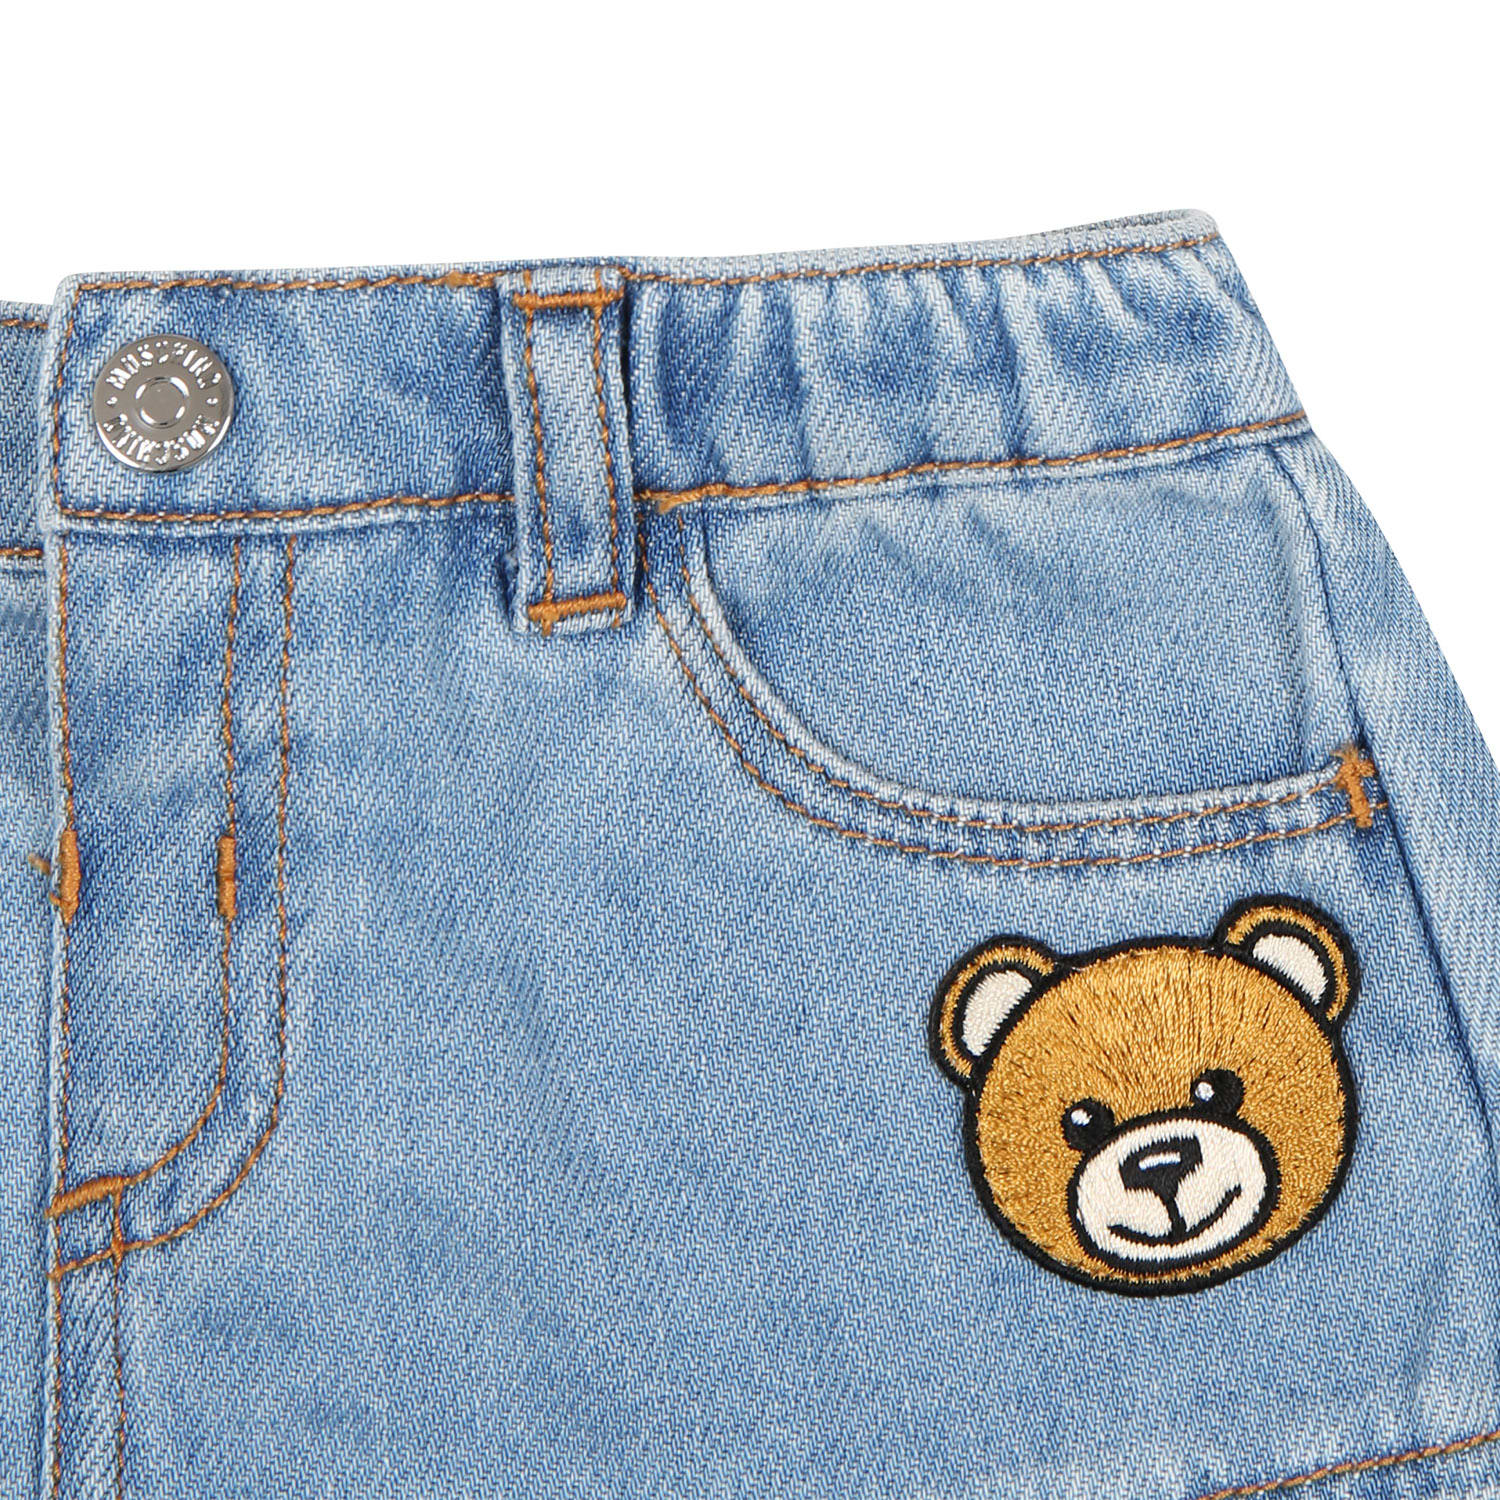 Shop Moschino Casual Denim Skirt For Baby Girl With Teddy Bear